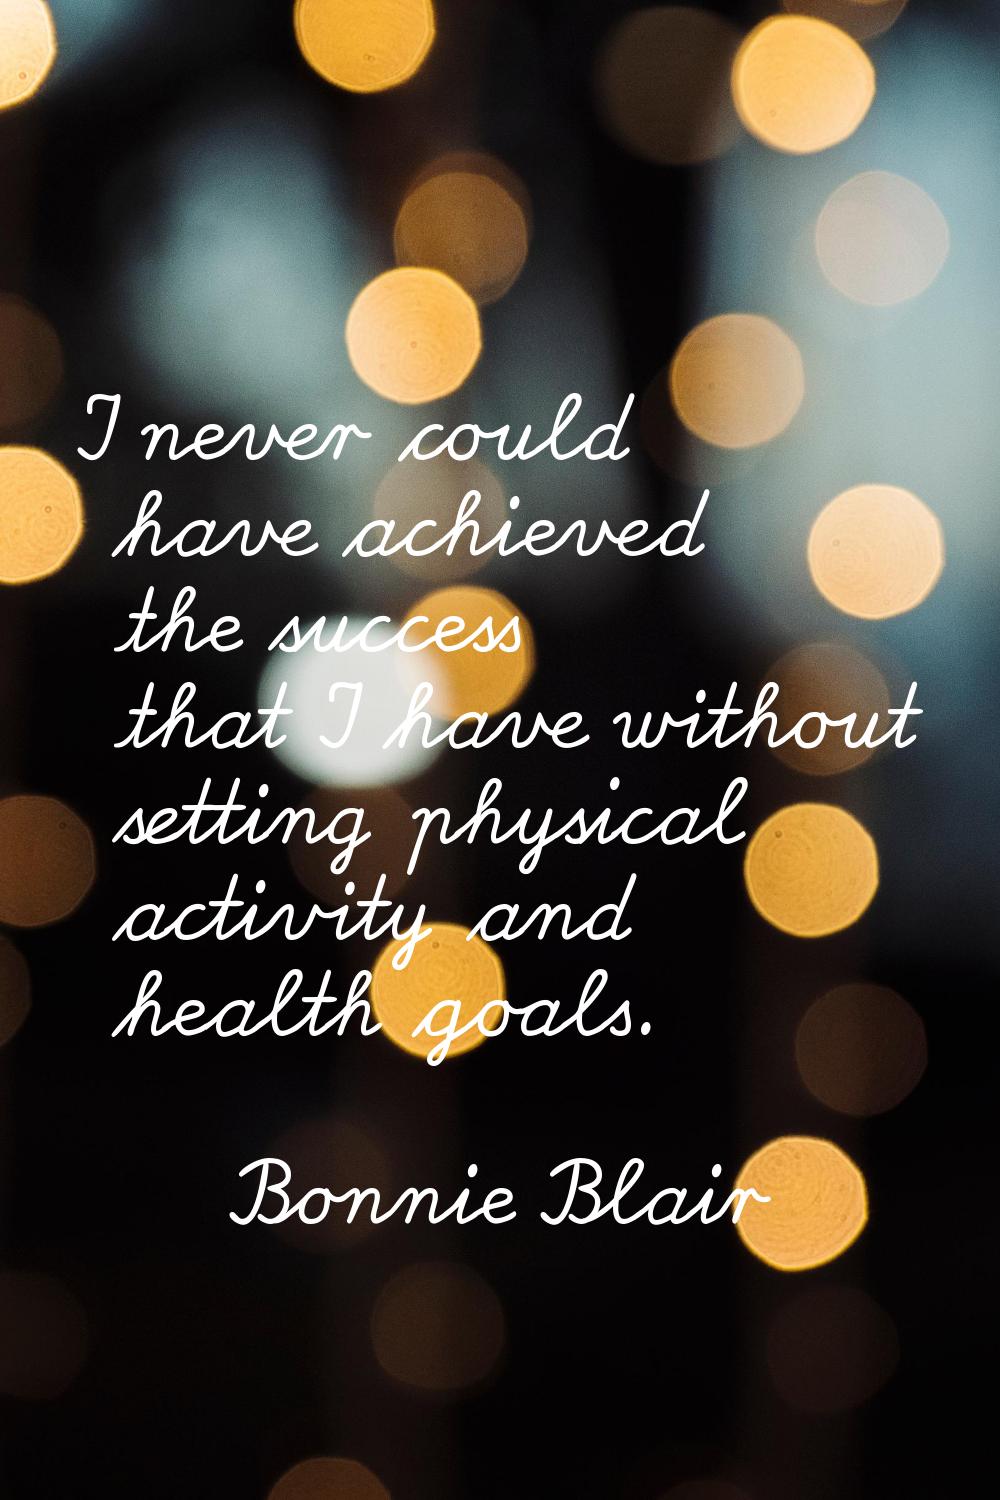 I never could have achieved the success that I have without setting physical activity and health go